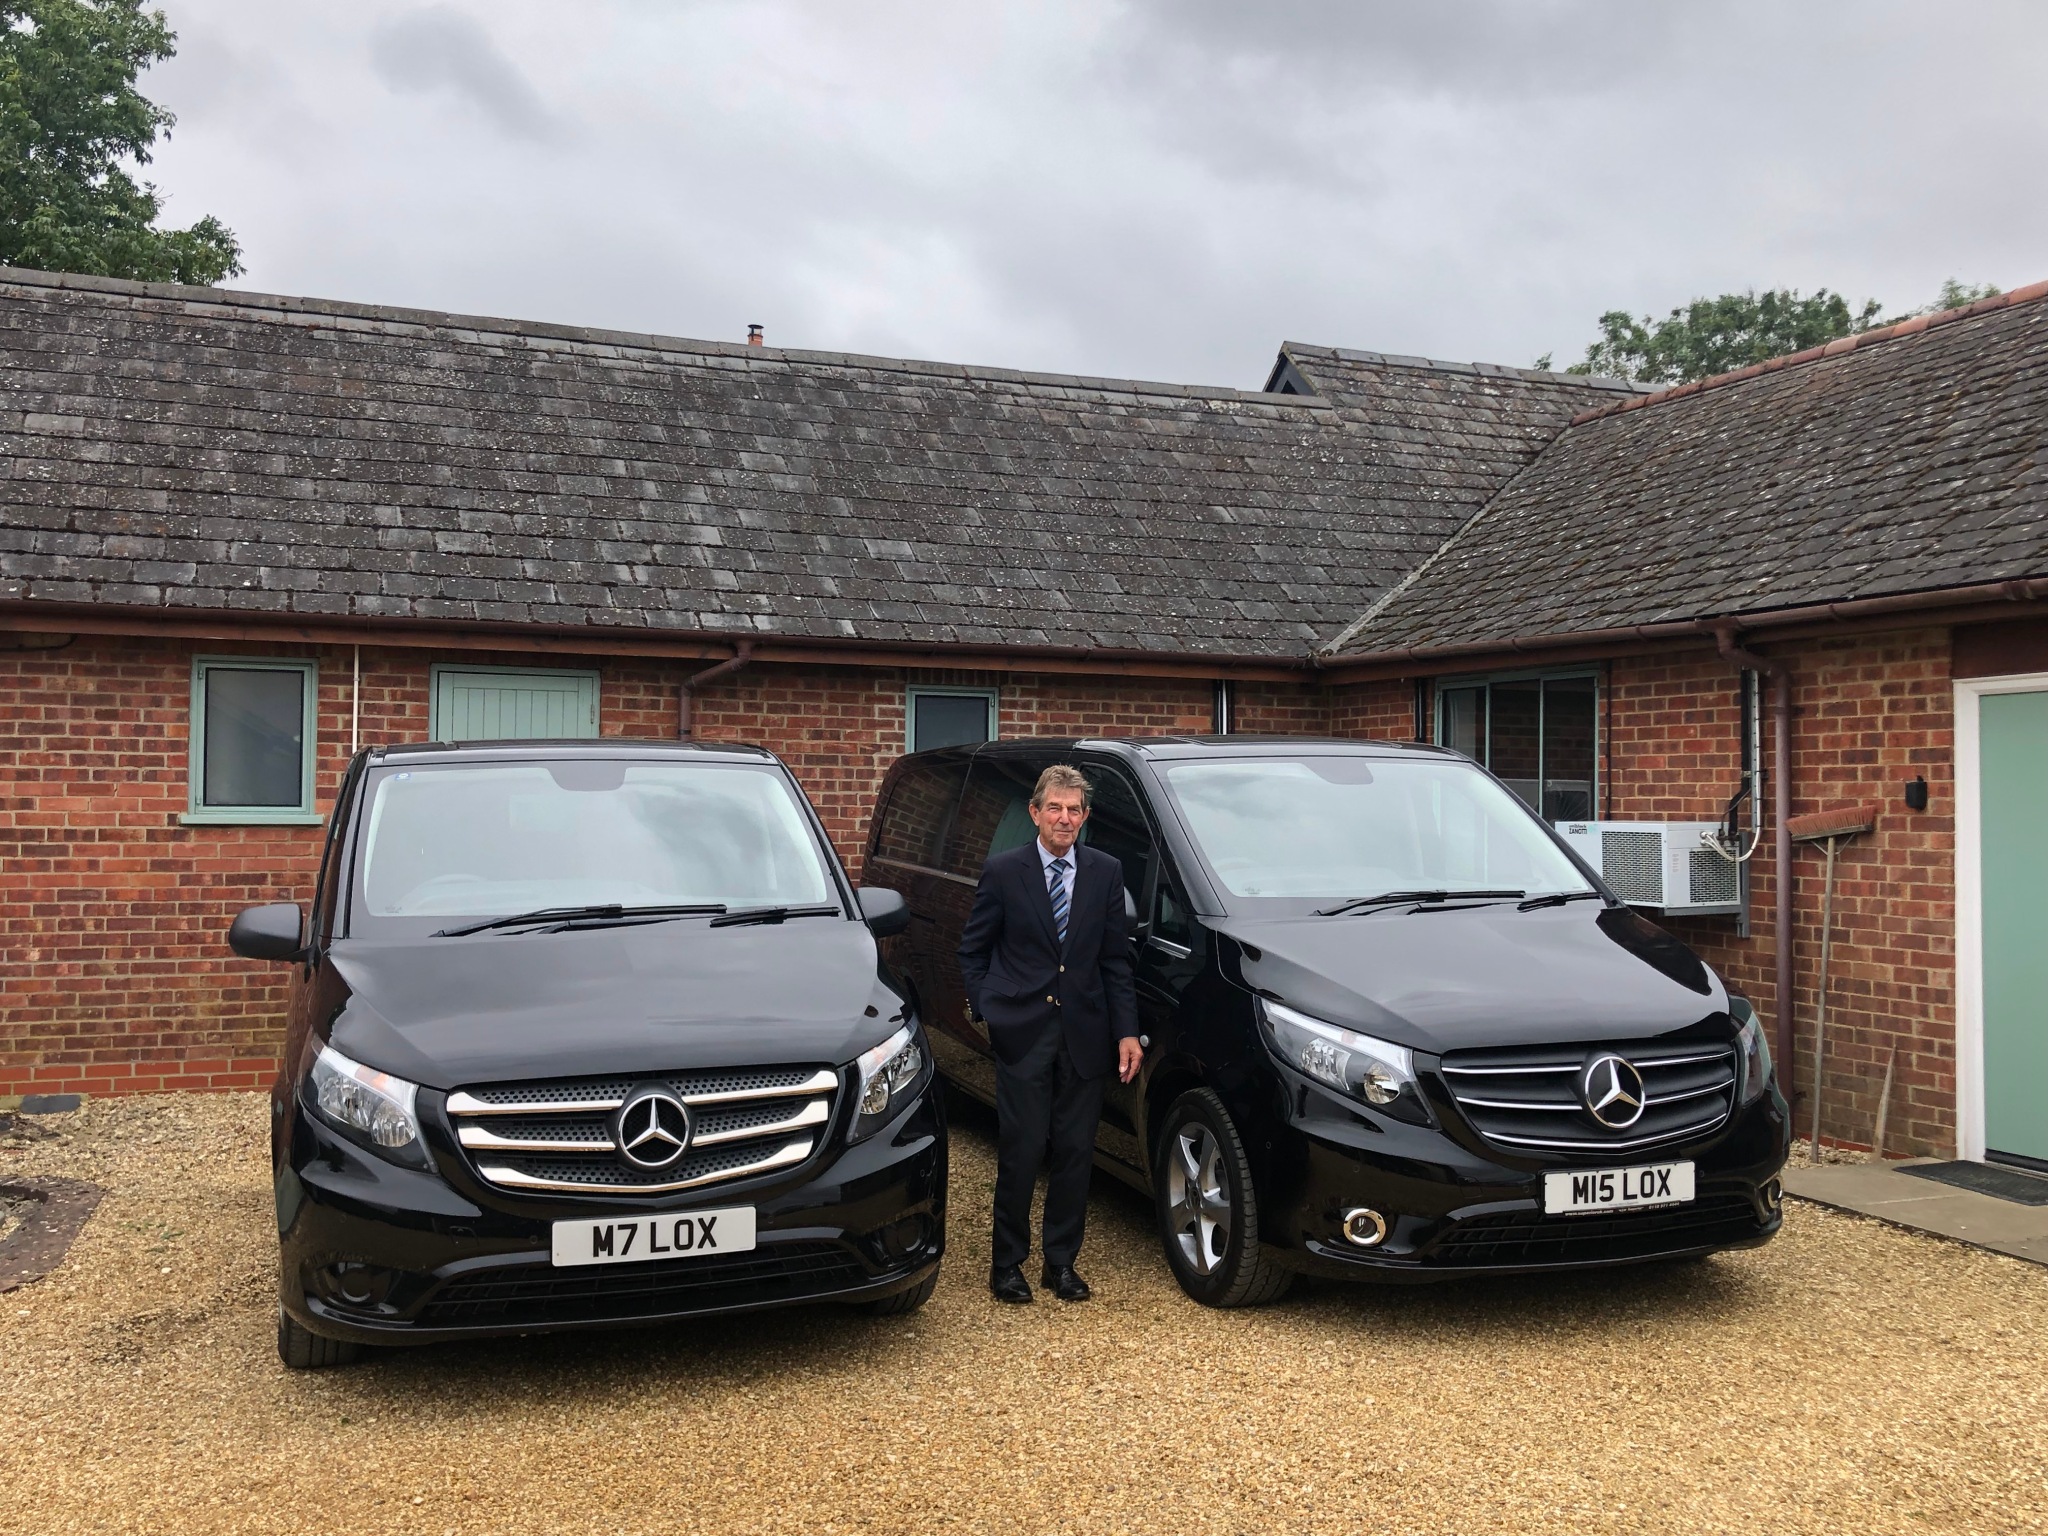 R. Locke & Son Commission Superior UK For Brand-New Bespoke Vito Removal Vehicle